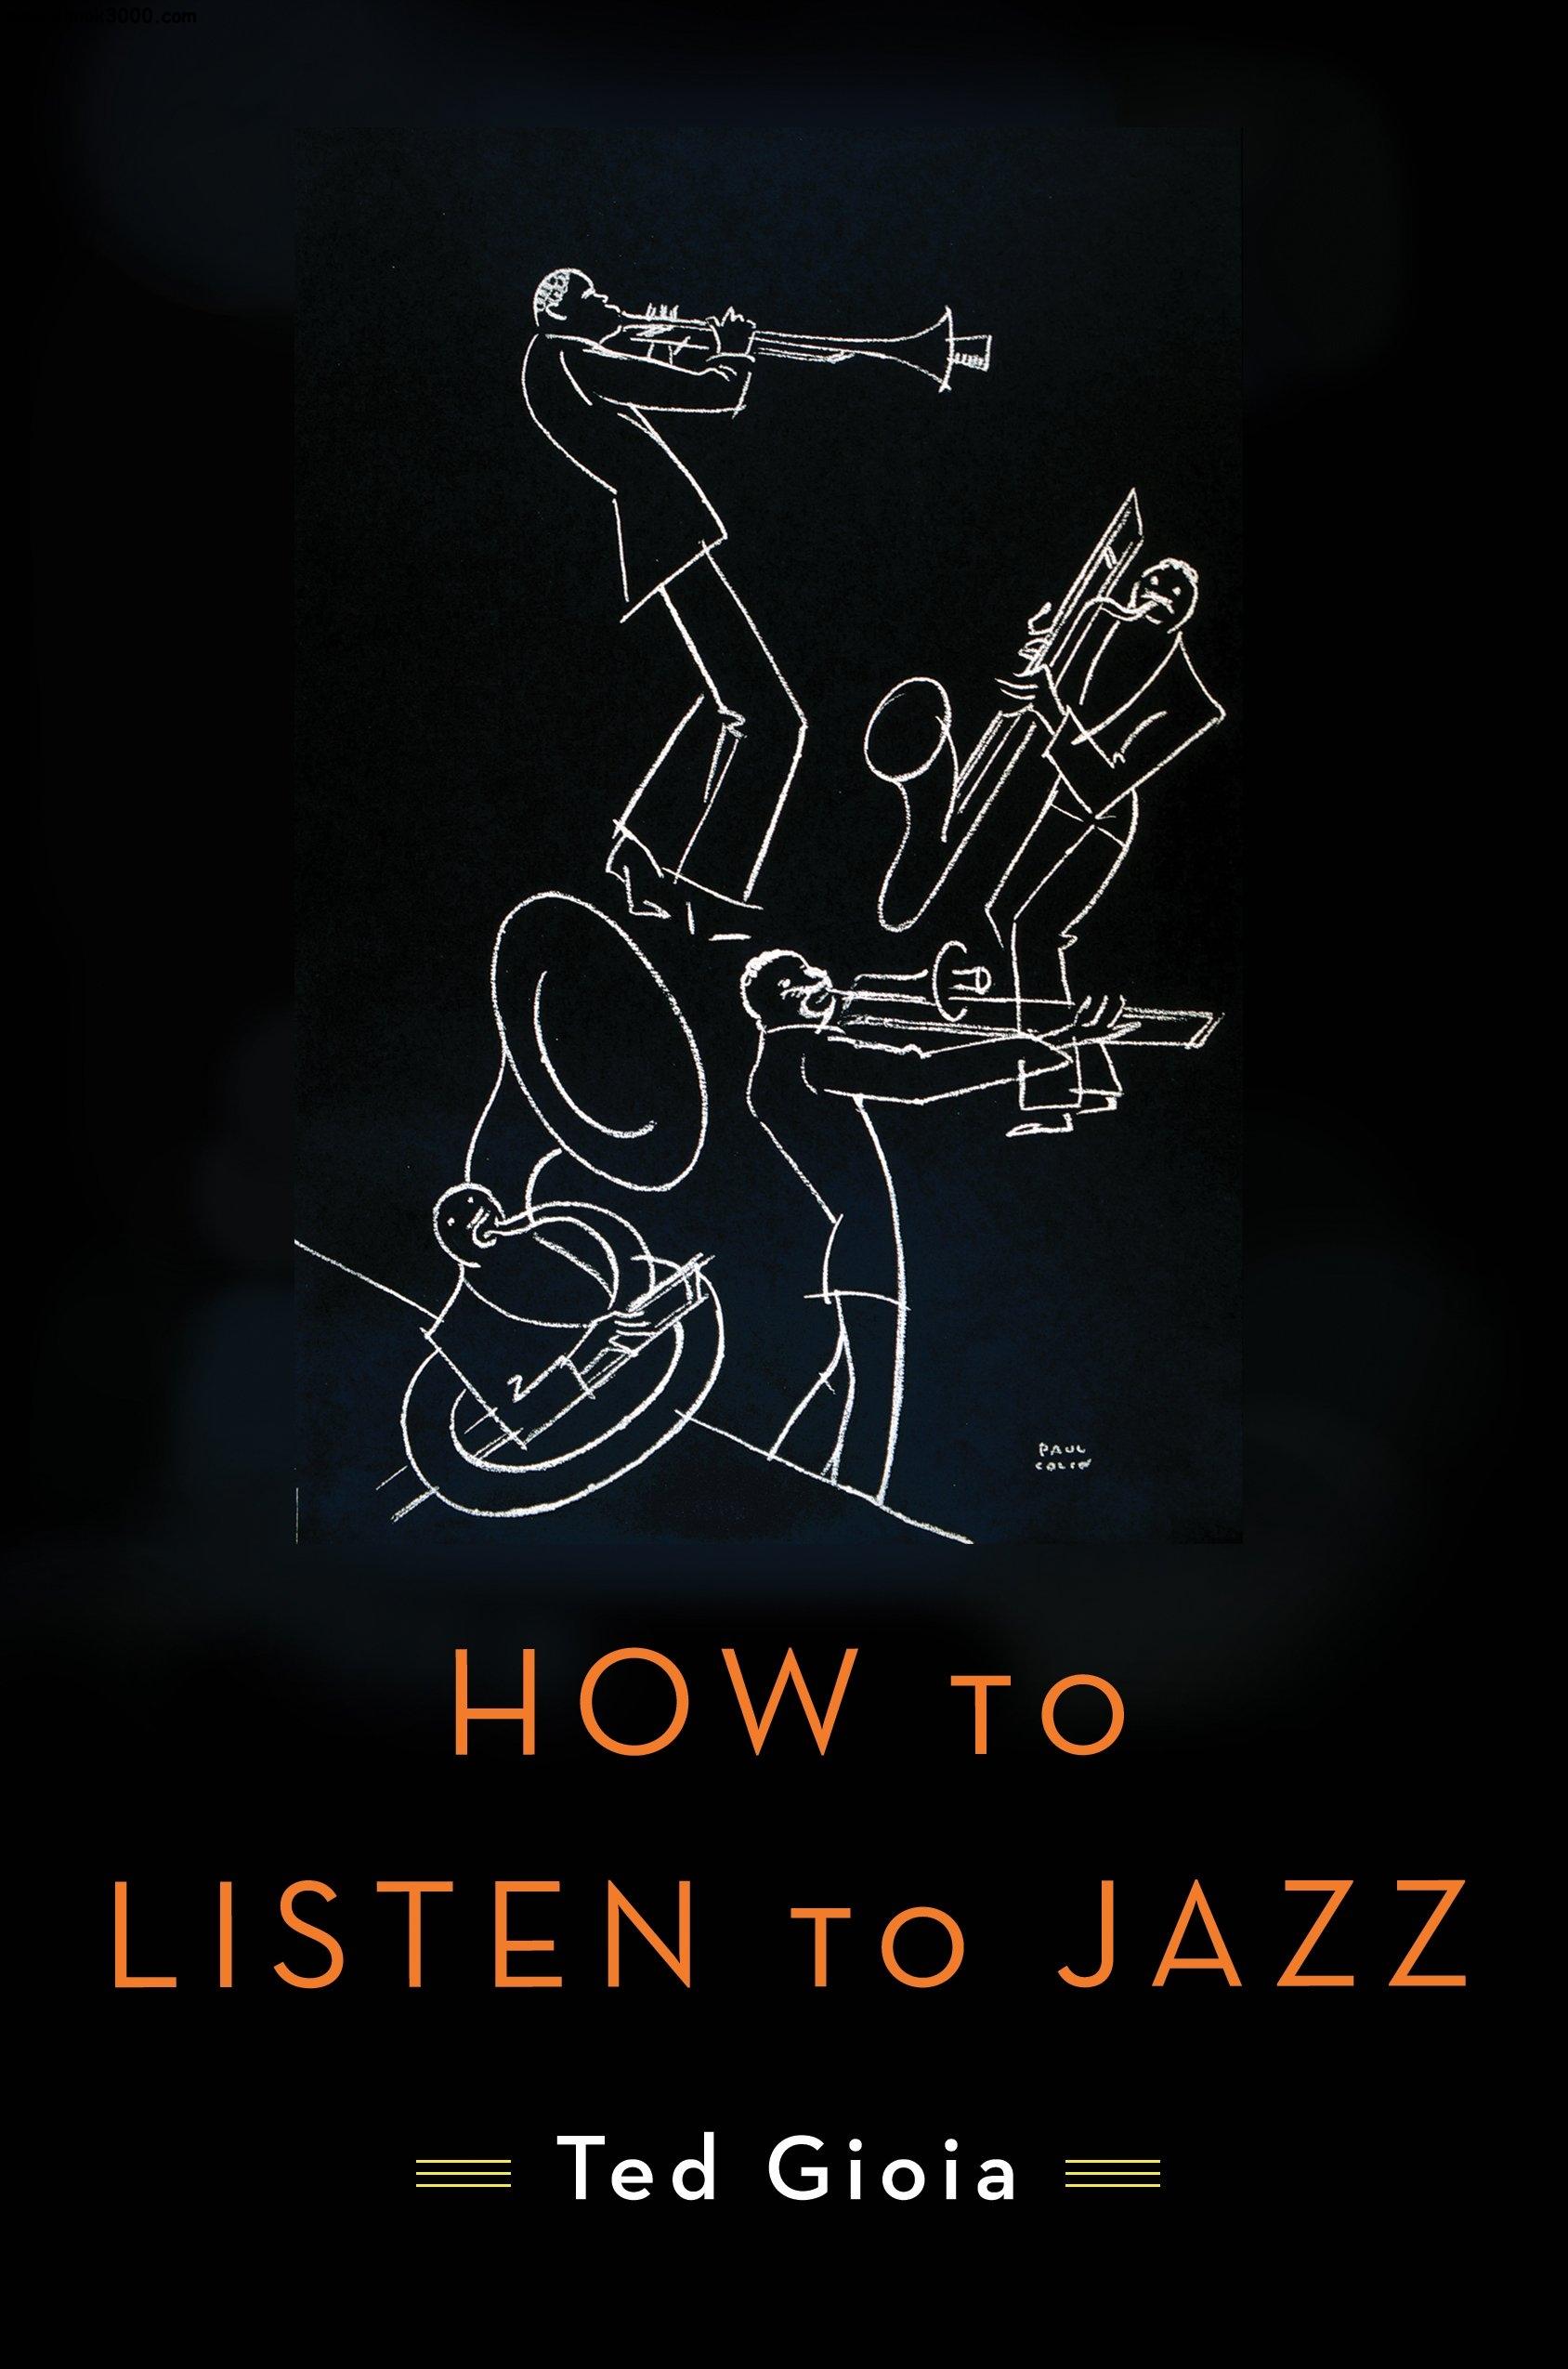 Ted Gioia: How to listen to jazz (2016)